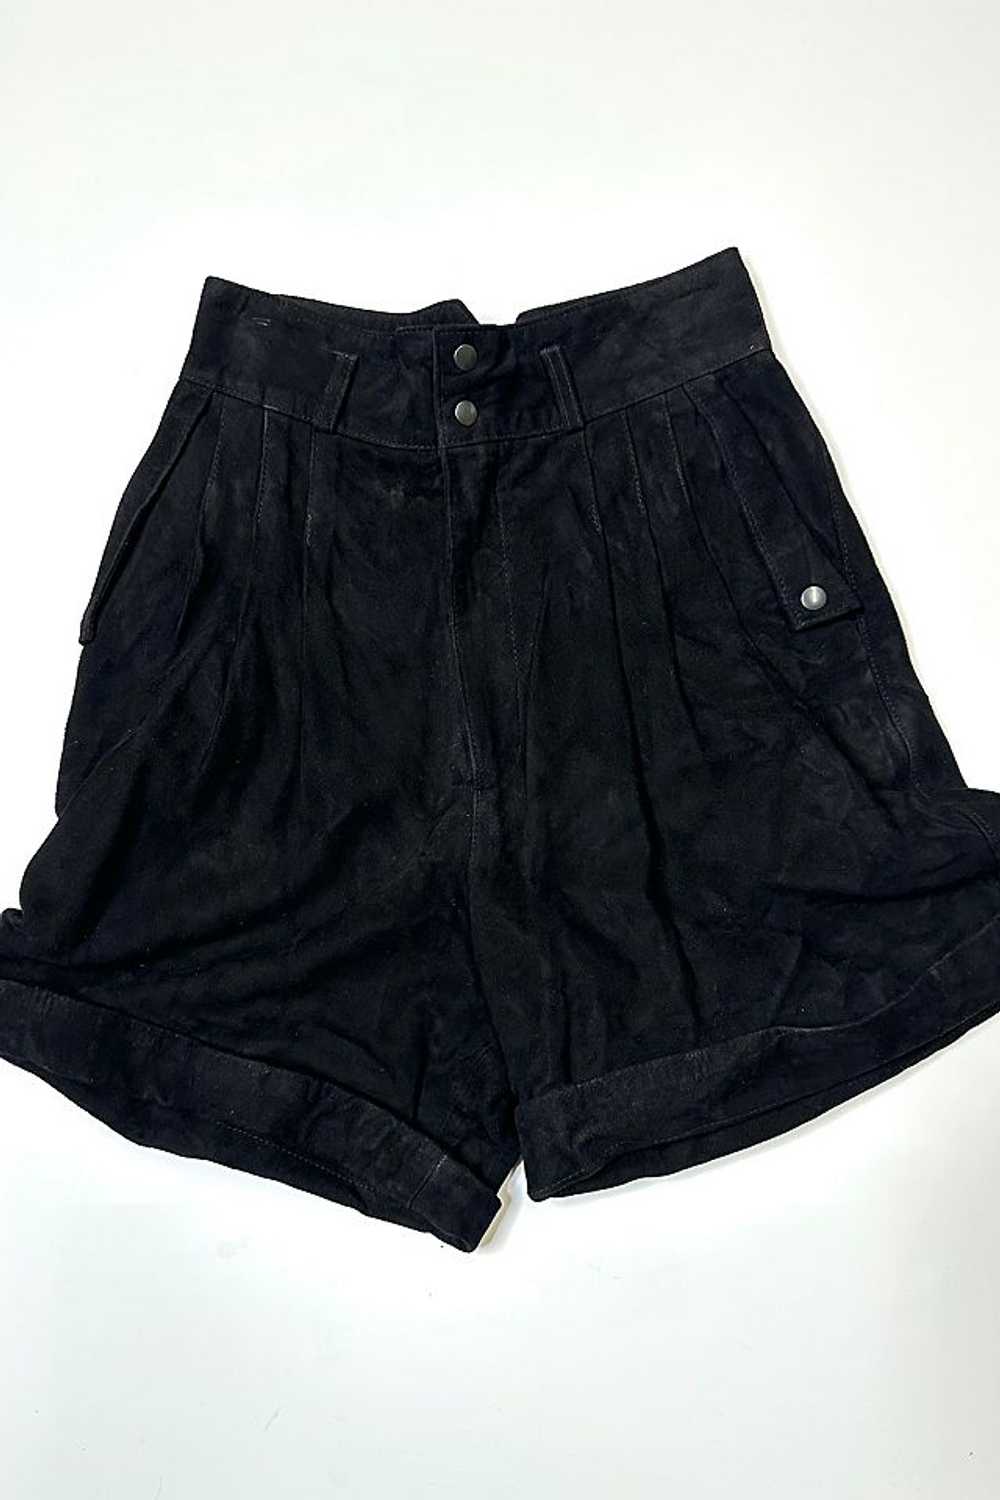 1980s Black Suede Pleated Shorts Selected by Cher… - image 1